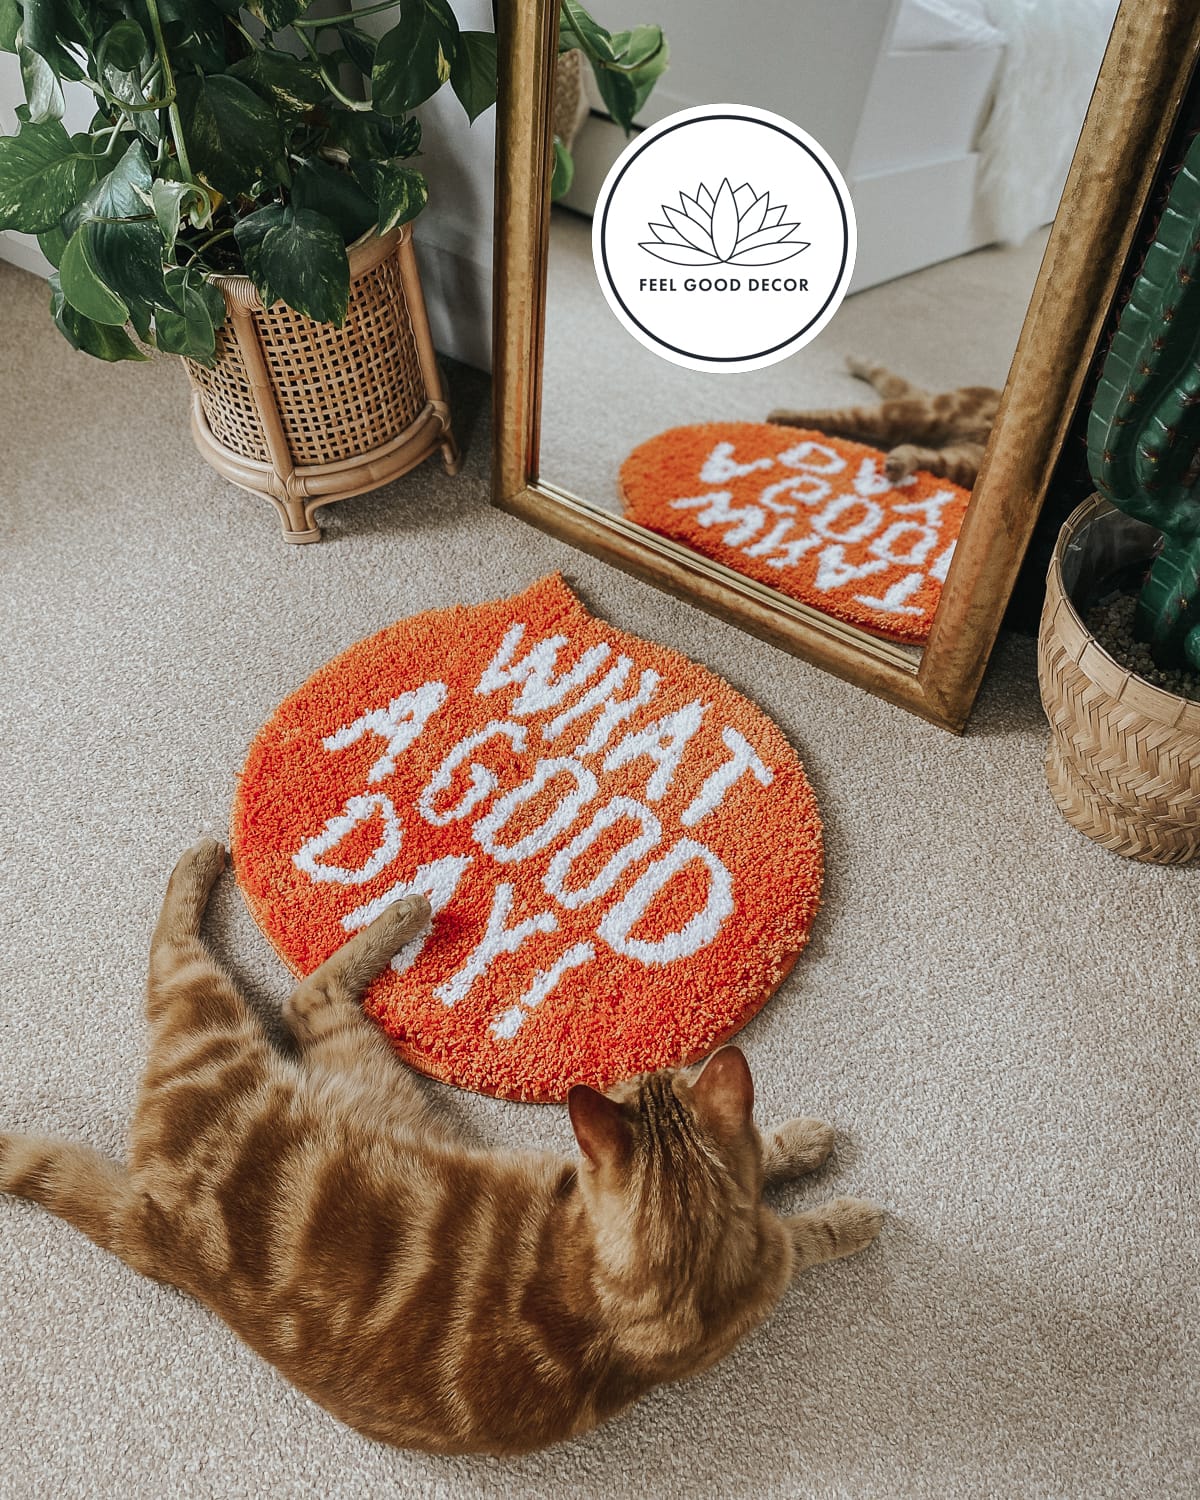 What A Good Day Positive Quote Decorative Orange Floor Mat Small Rug 45 x  50cm